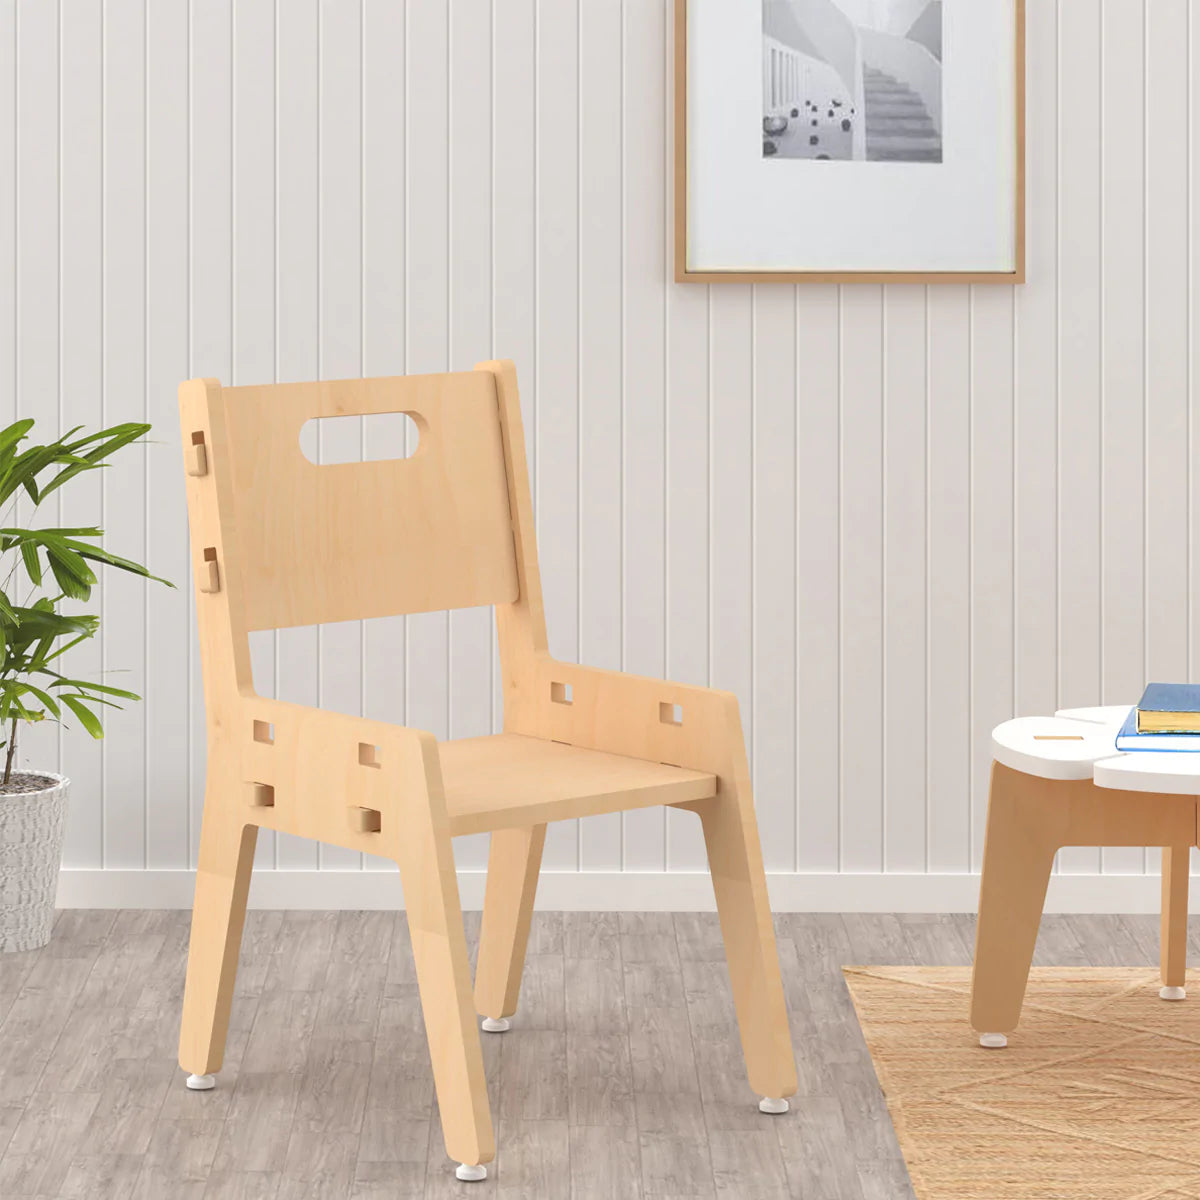 Buy Silver Peach  Wooden Chair - Natural - Learning Furniture - SkilloToys.com